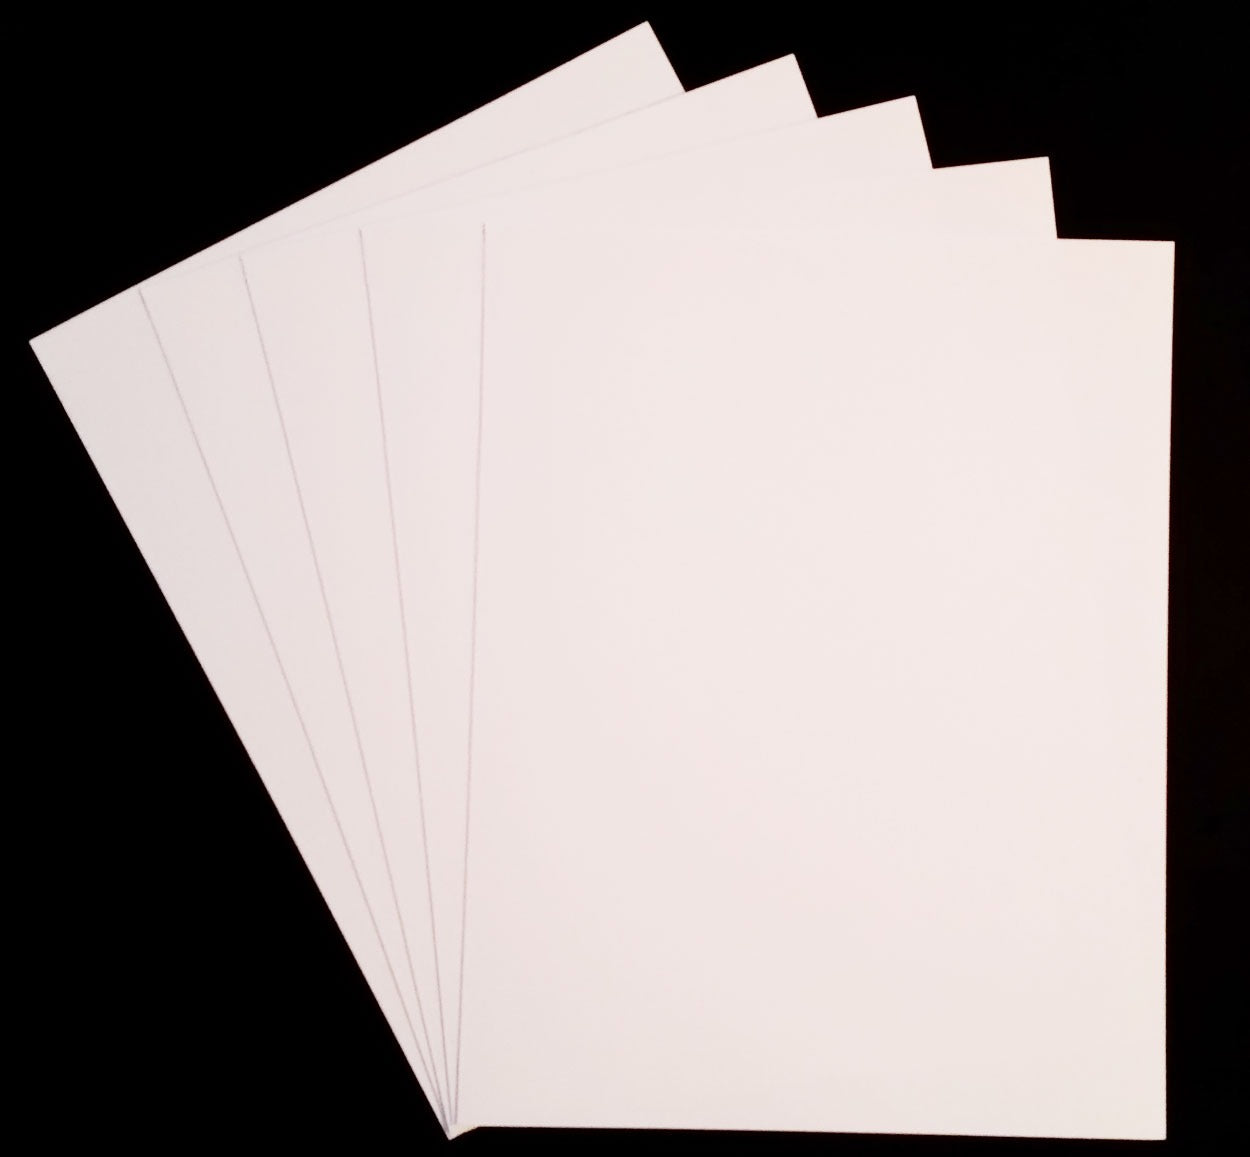 17 X 22, 25 sheets/box, Fine Art Dual-Sided Paper, 210 gsm